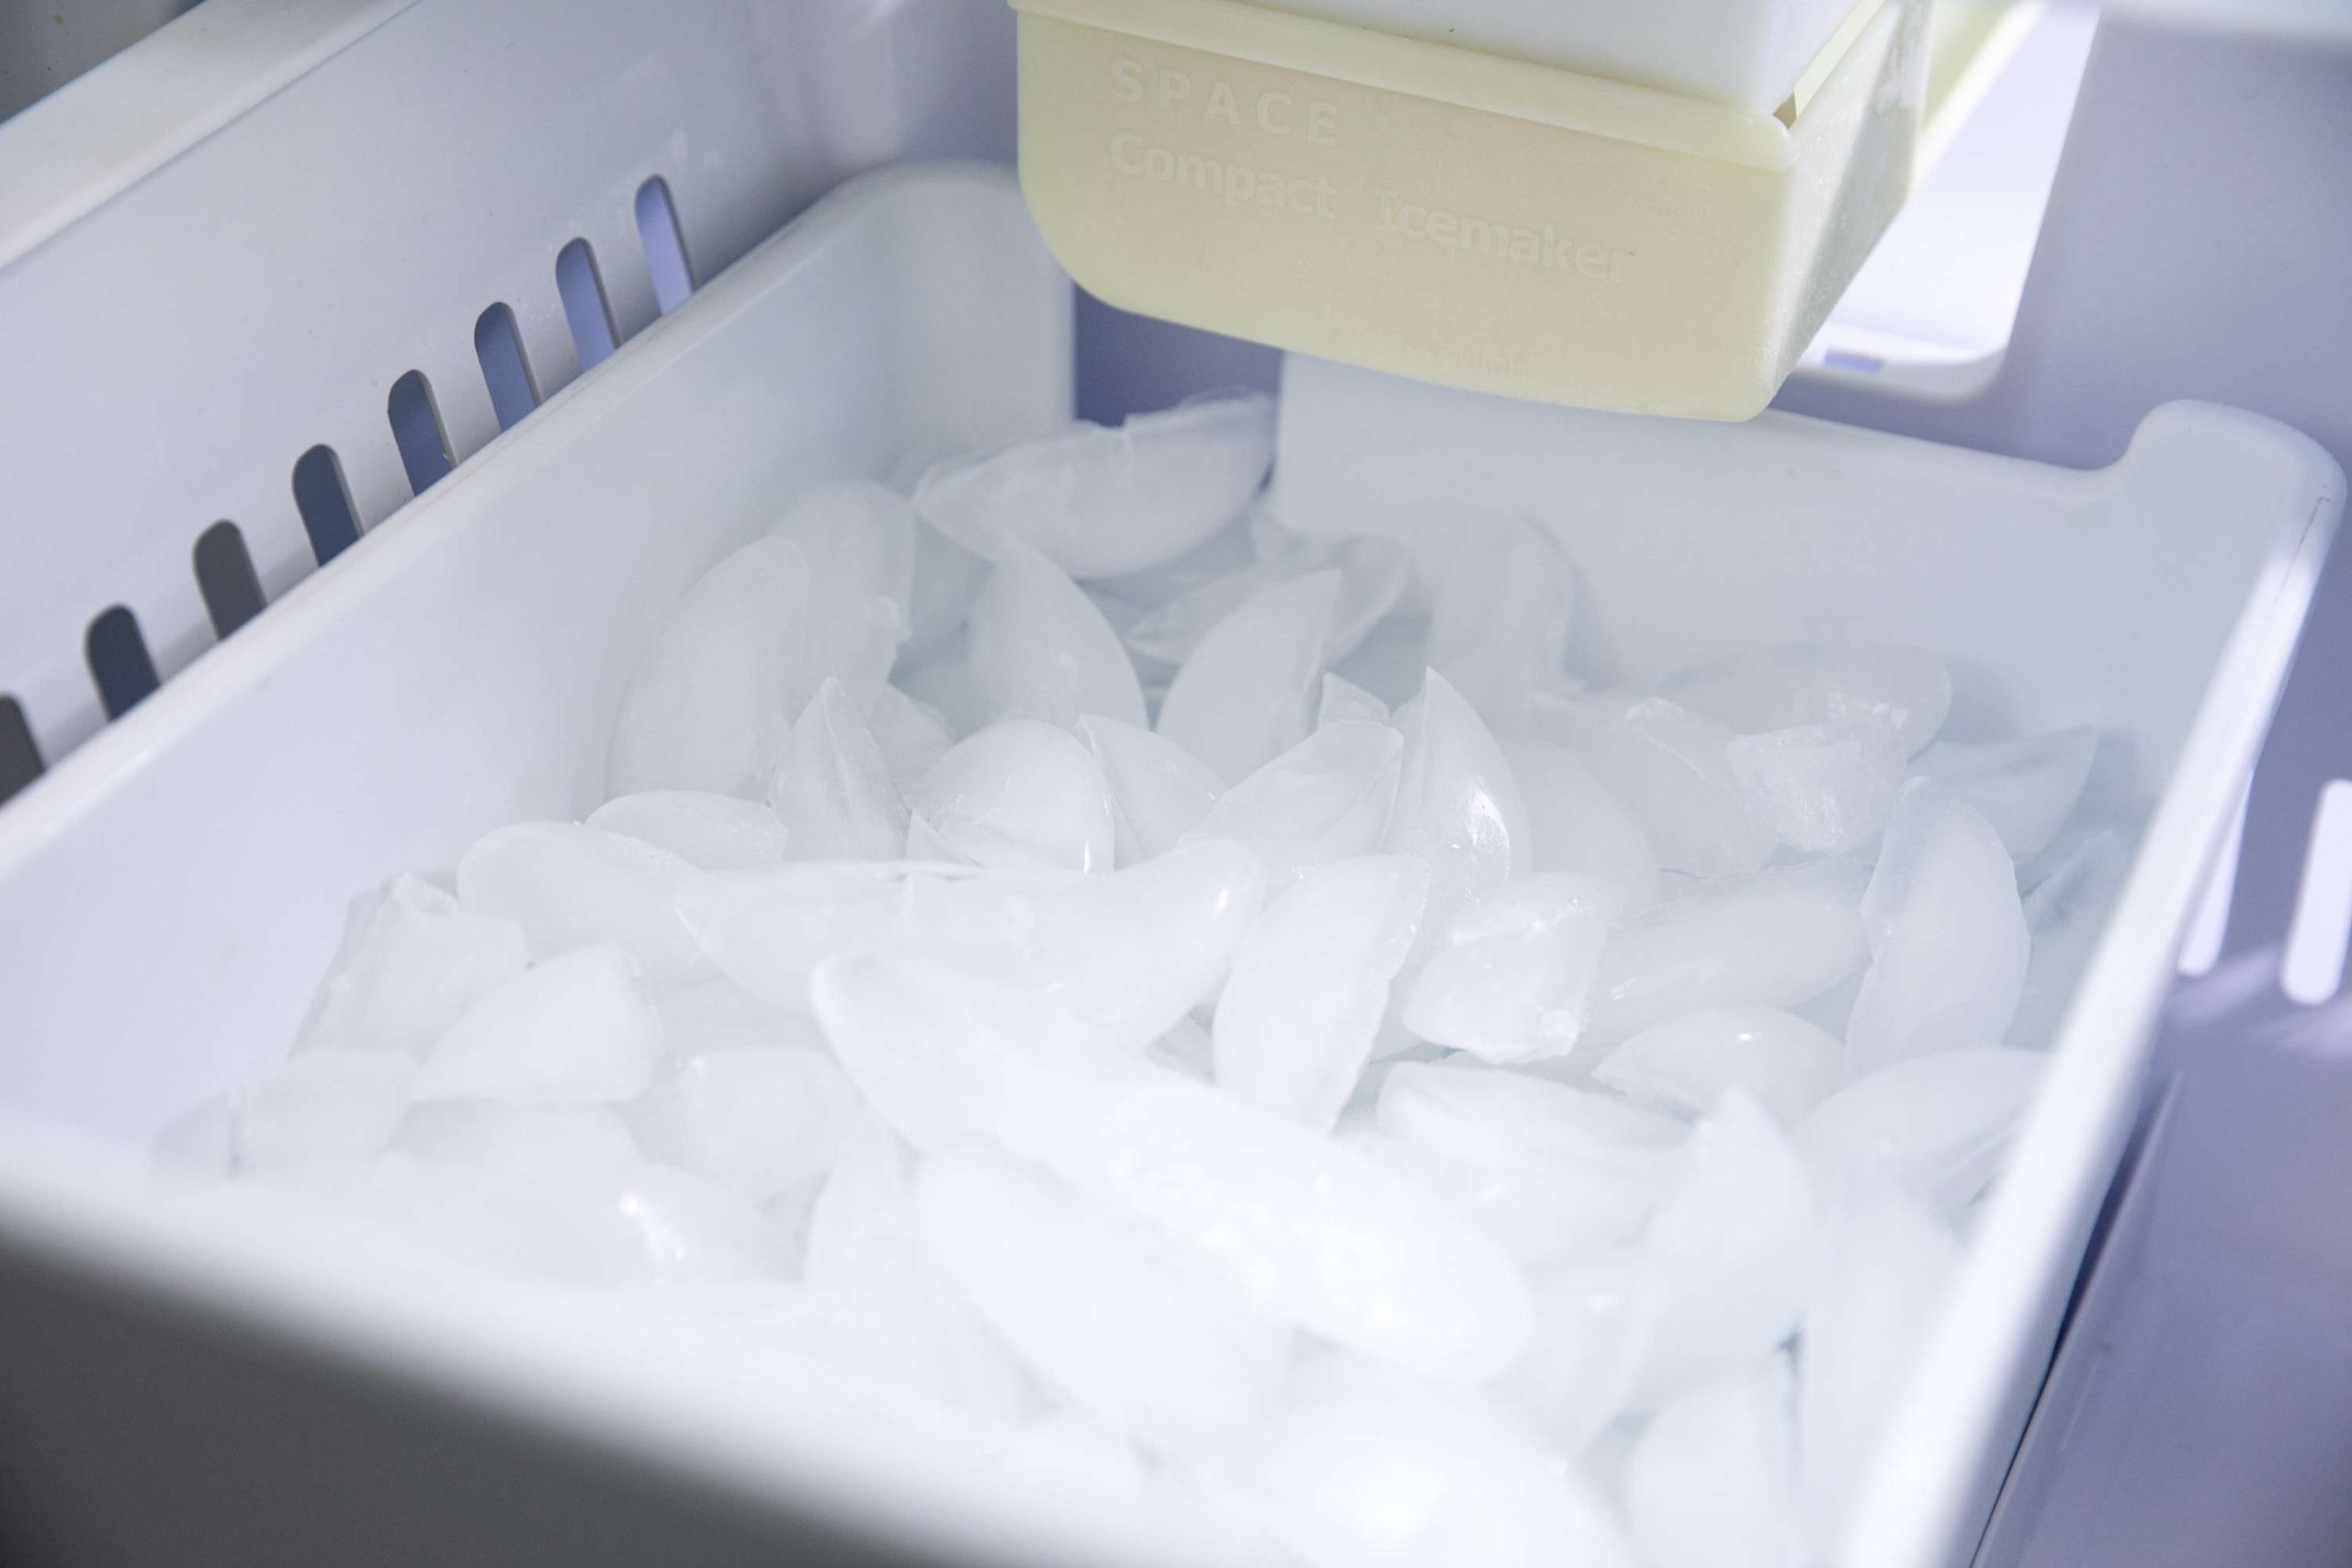 Turning off the Ice Maker